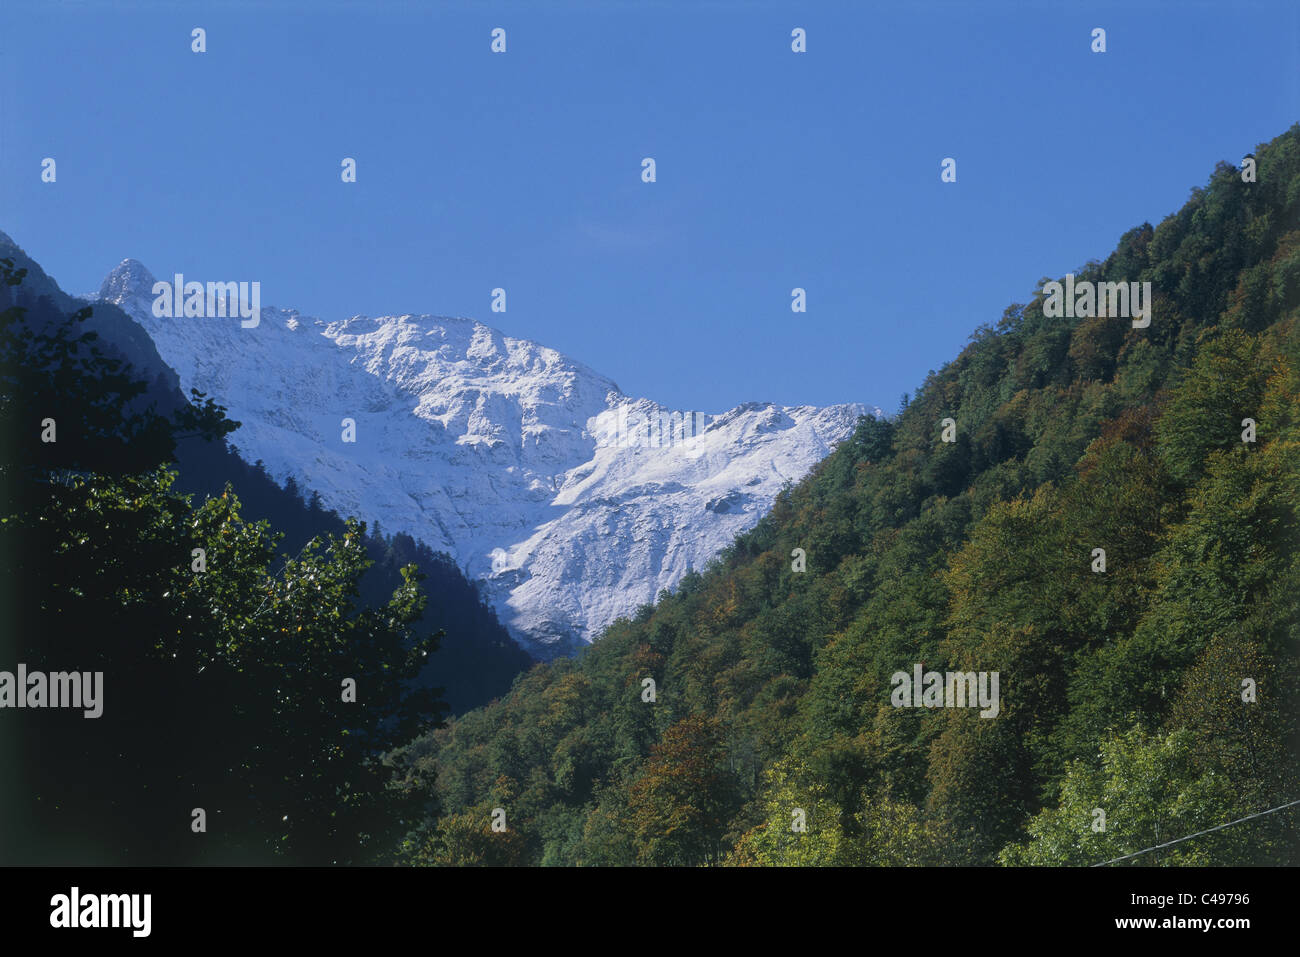 Image of the snowy mountains of France Stock Photo